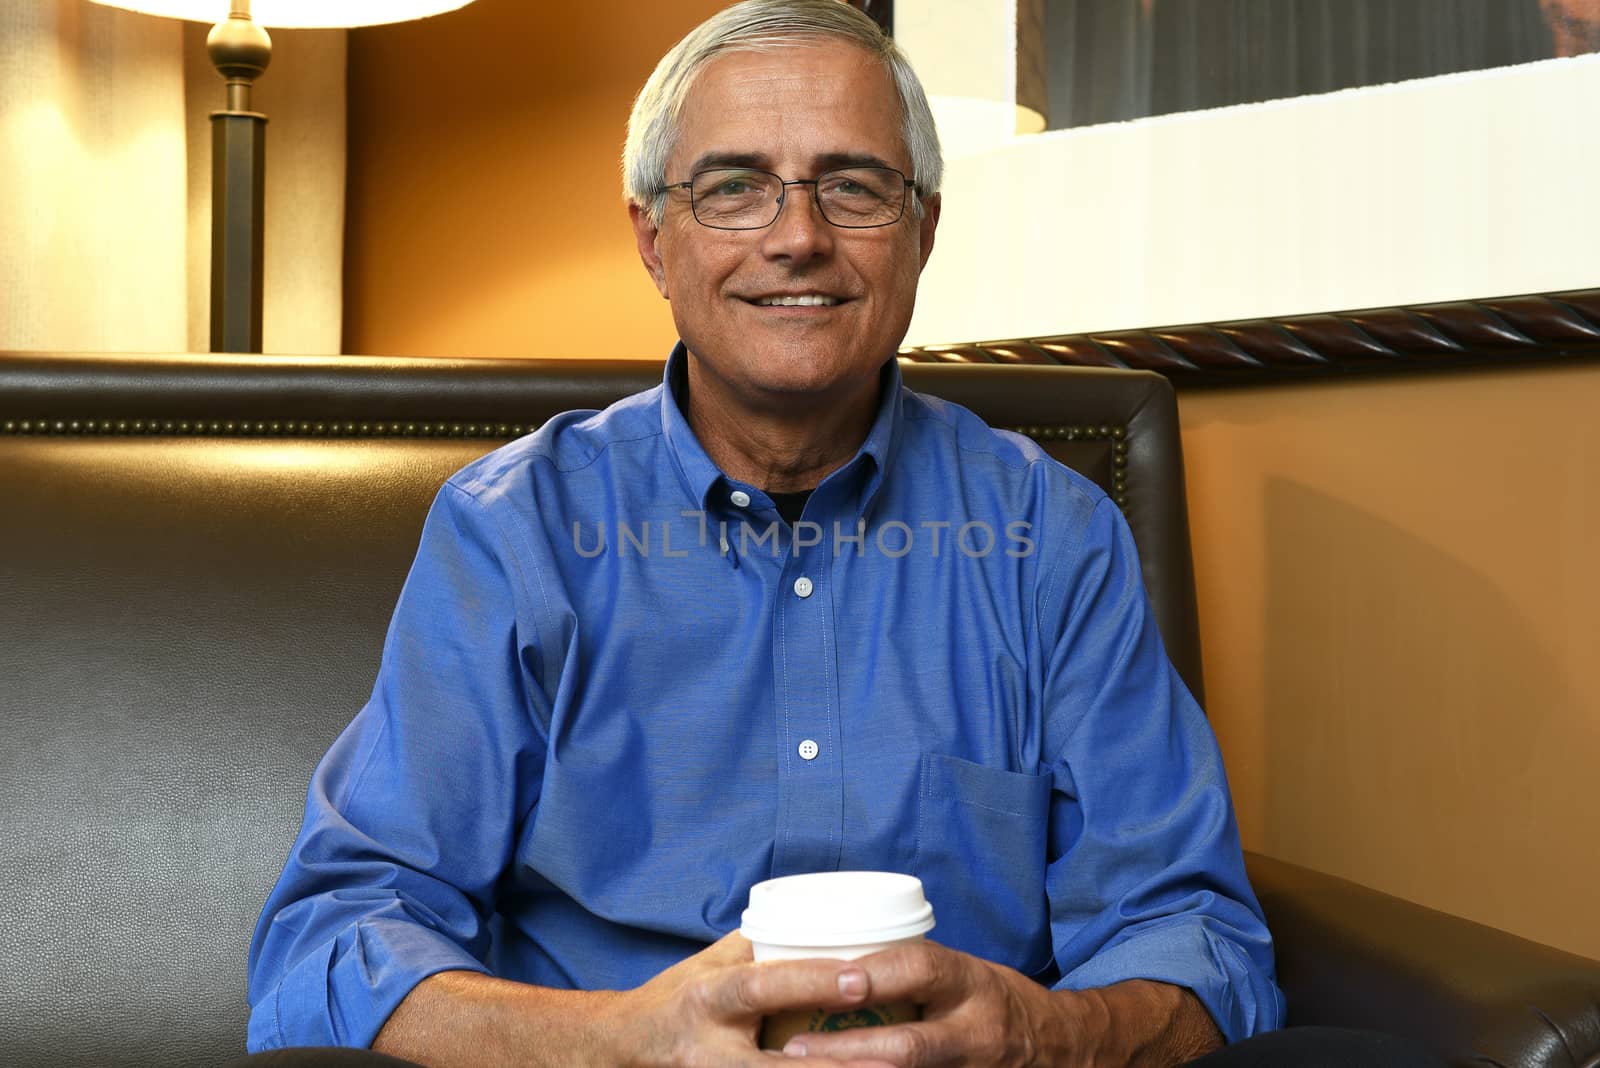 Portrait of a senior businessman seated on the sofa in a hotel room holding a cup of coffee.